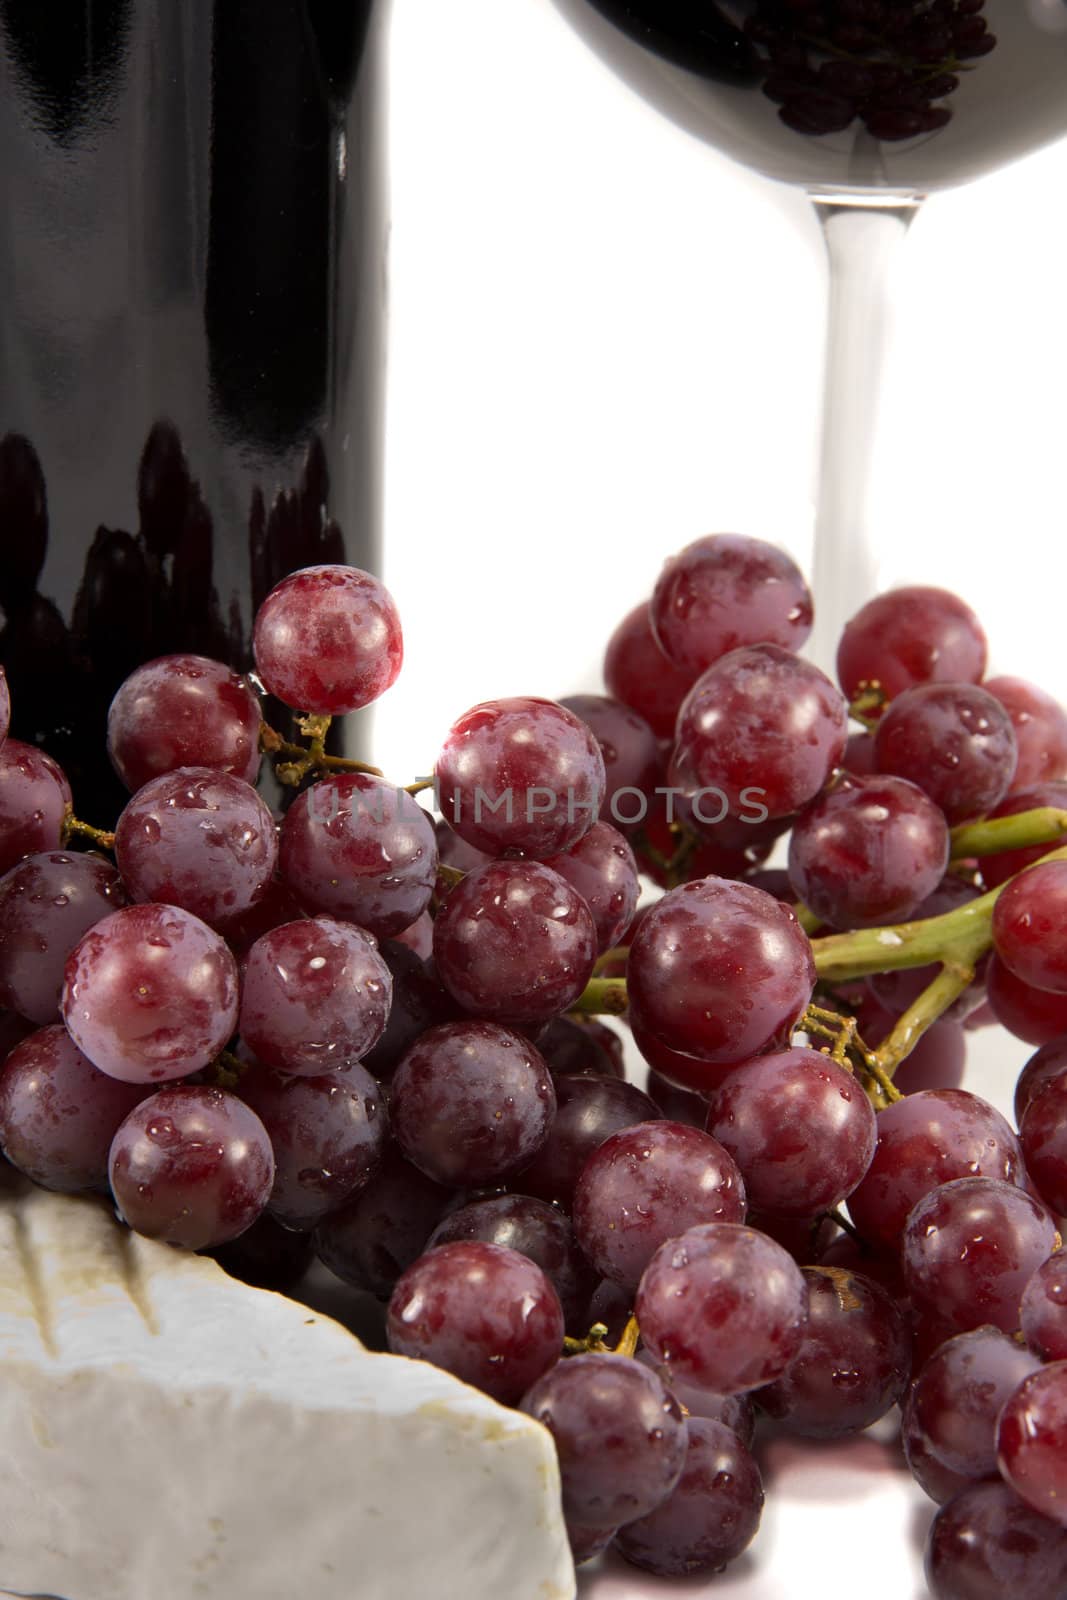 Picture of some grapes and a piece of brie with red wine in the background